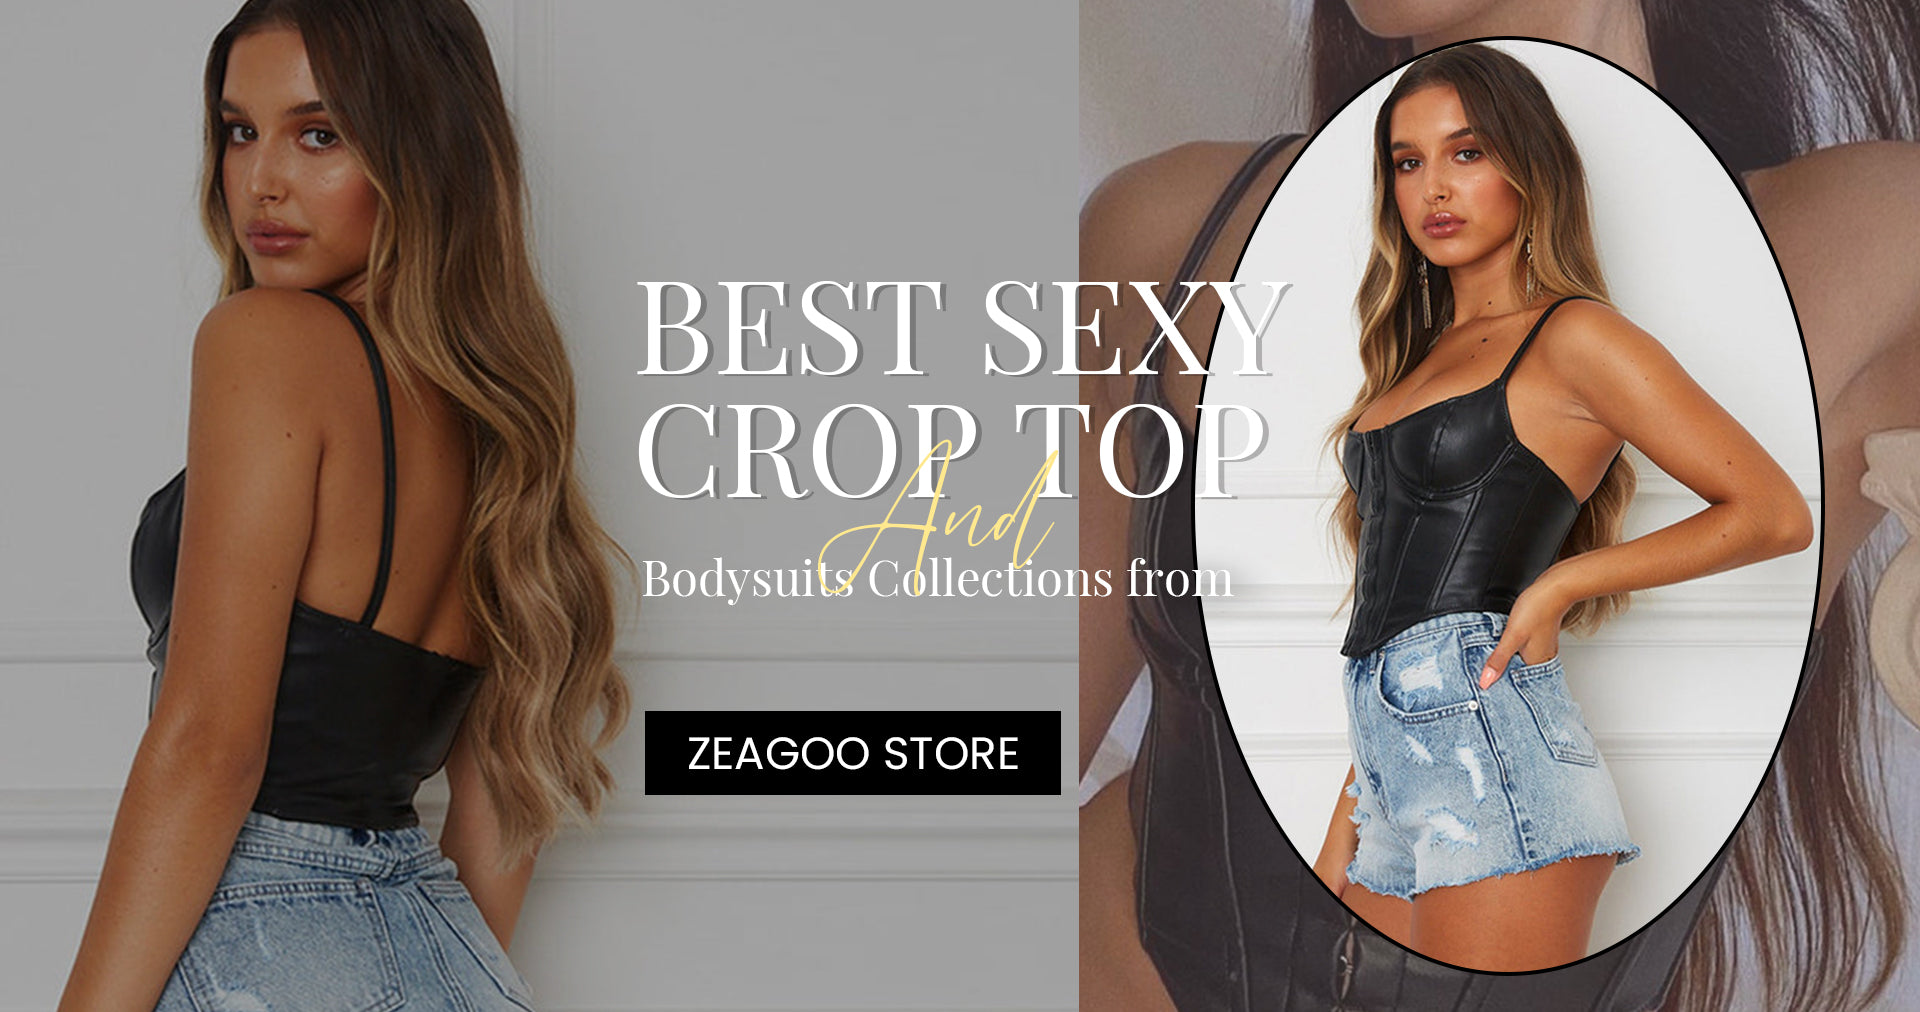 Best Sexy Crop Top and Bodysuits Collections from Zeagoo Store